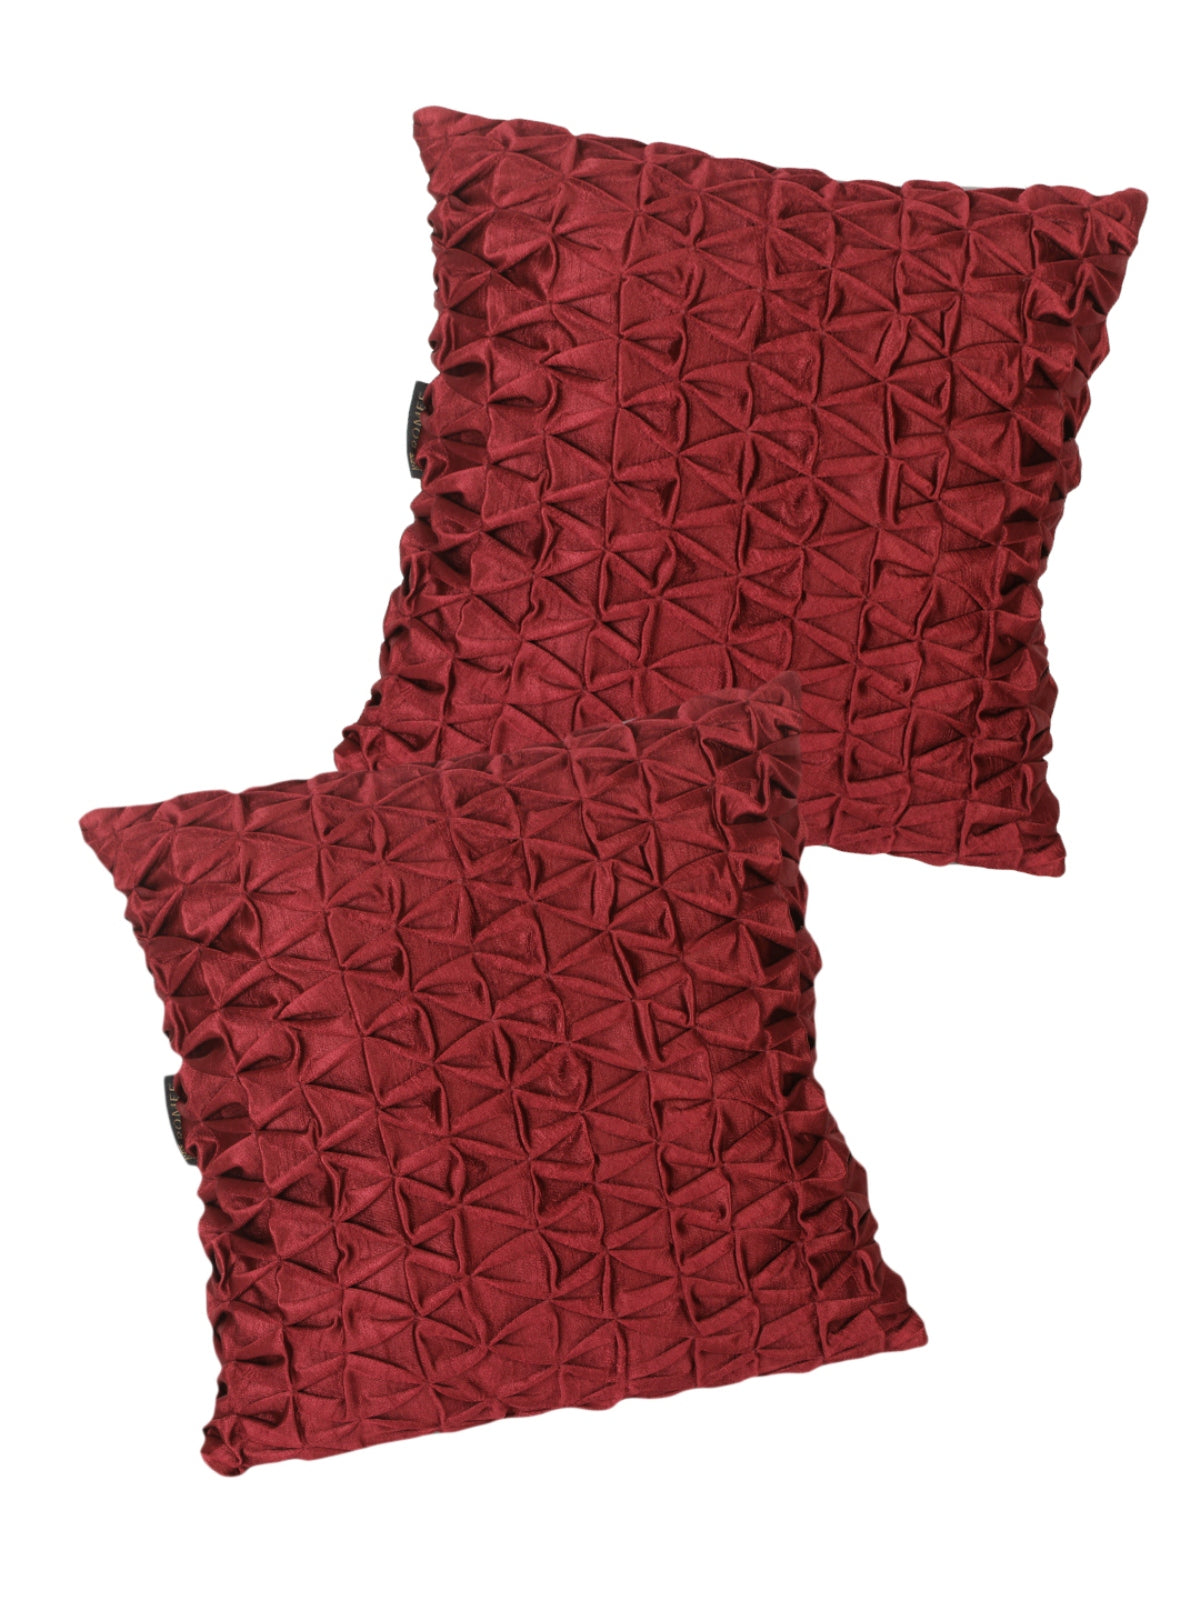 Polyester Fabric Geometric Cushion Cover 16x16 Set of 2 - Maroon